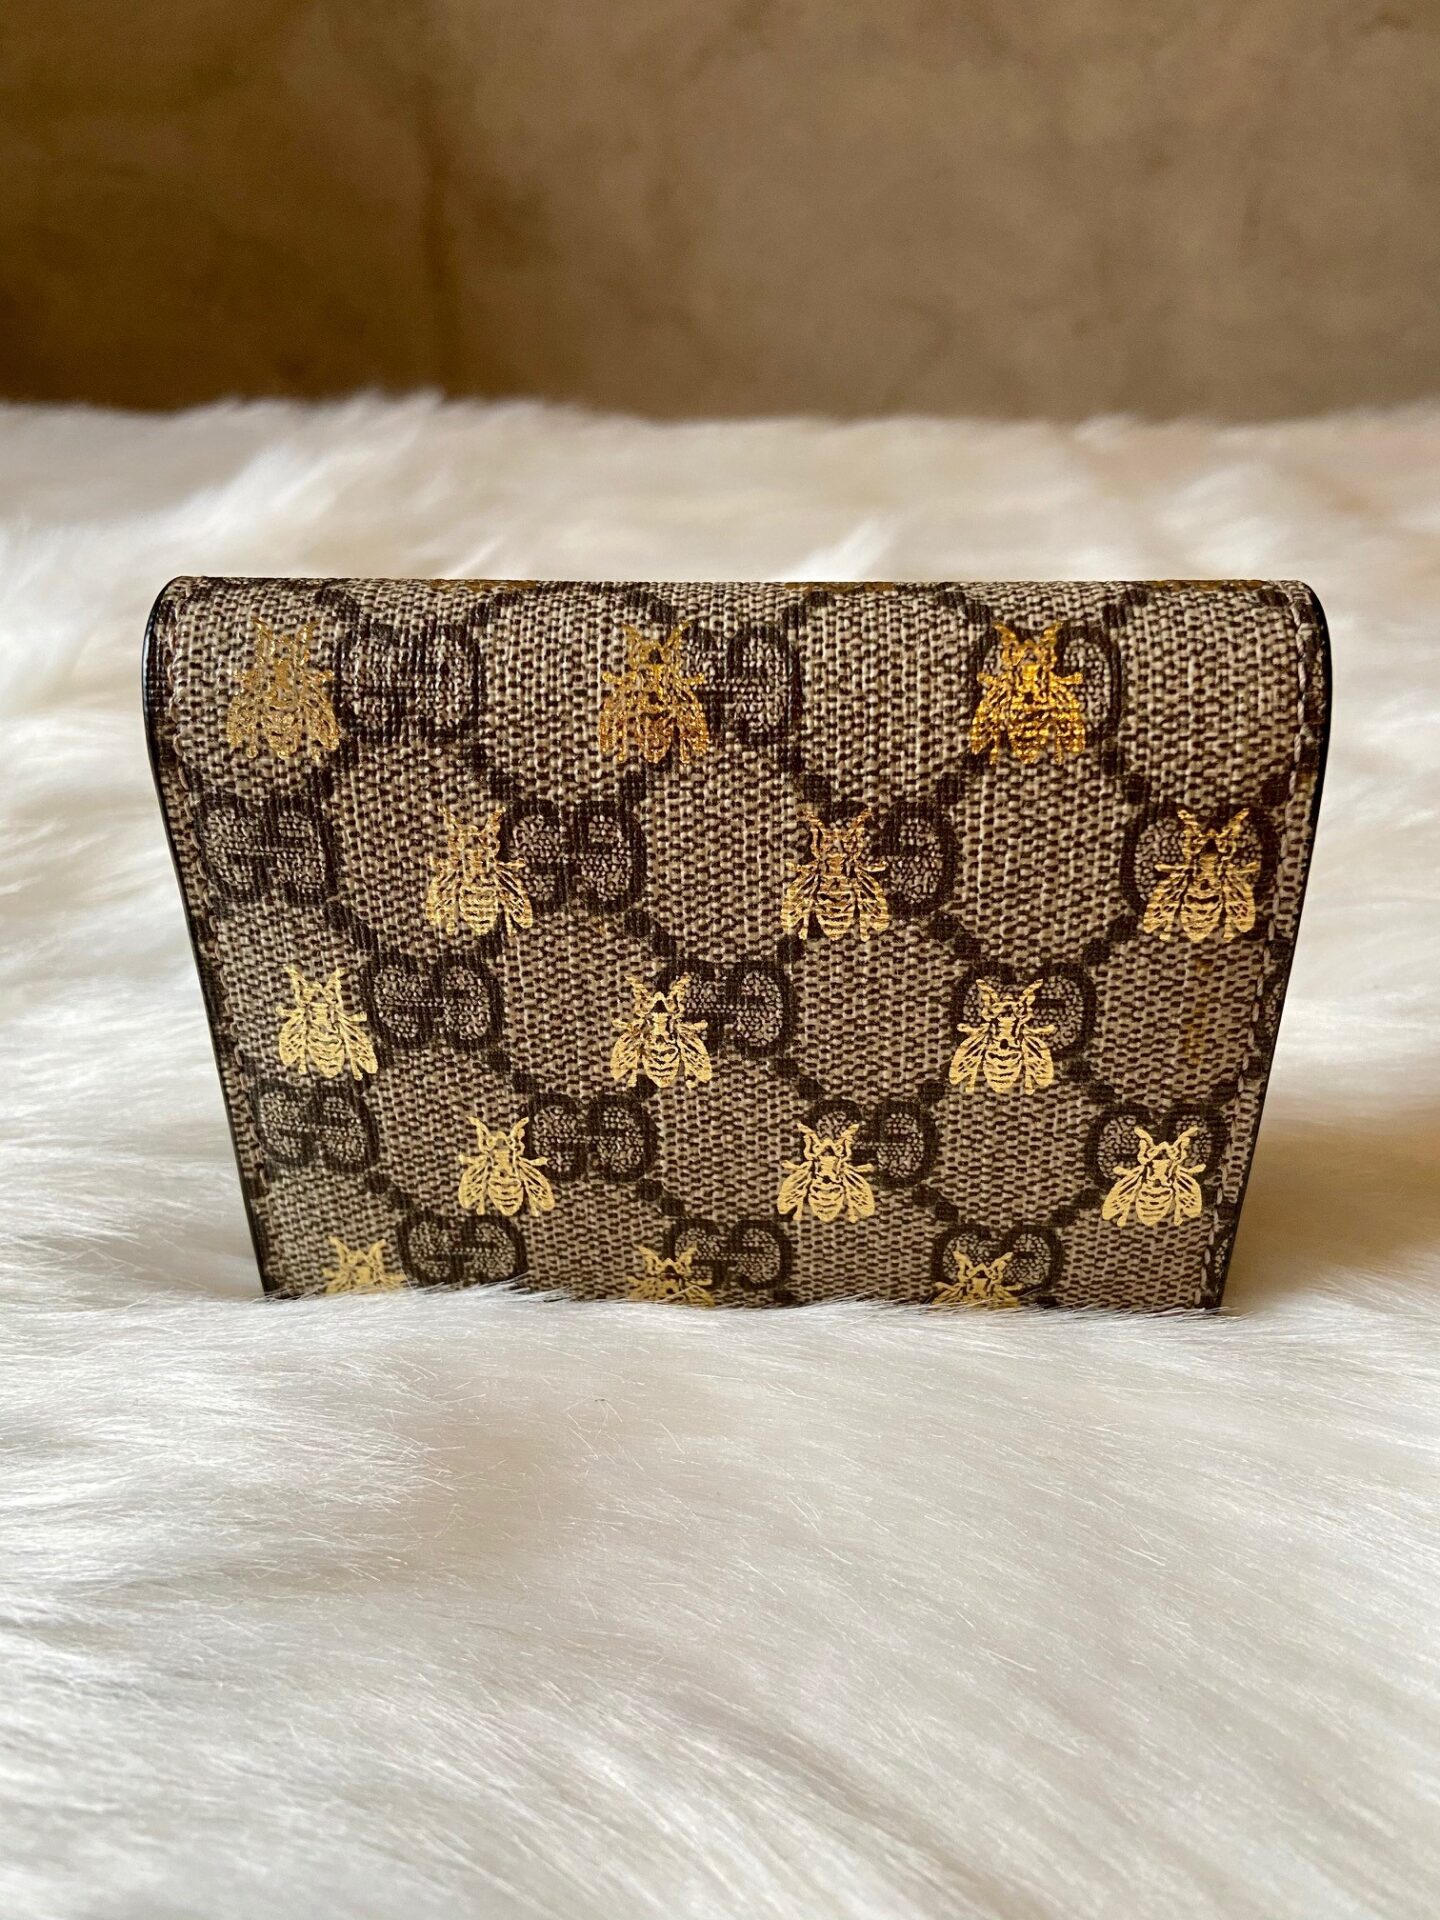 Is the Louis Vuitton Pochette Metis Worth the Hype? My Honest